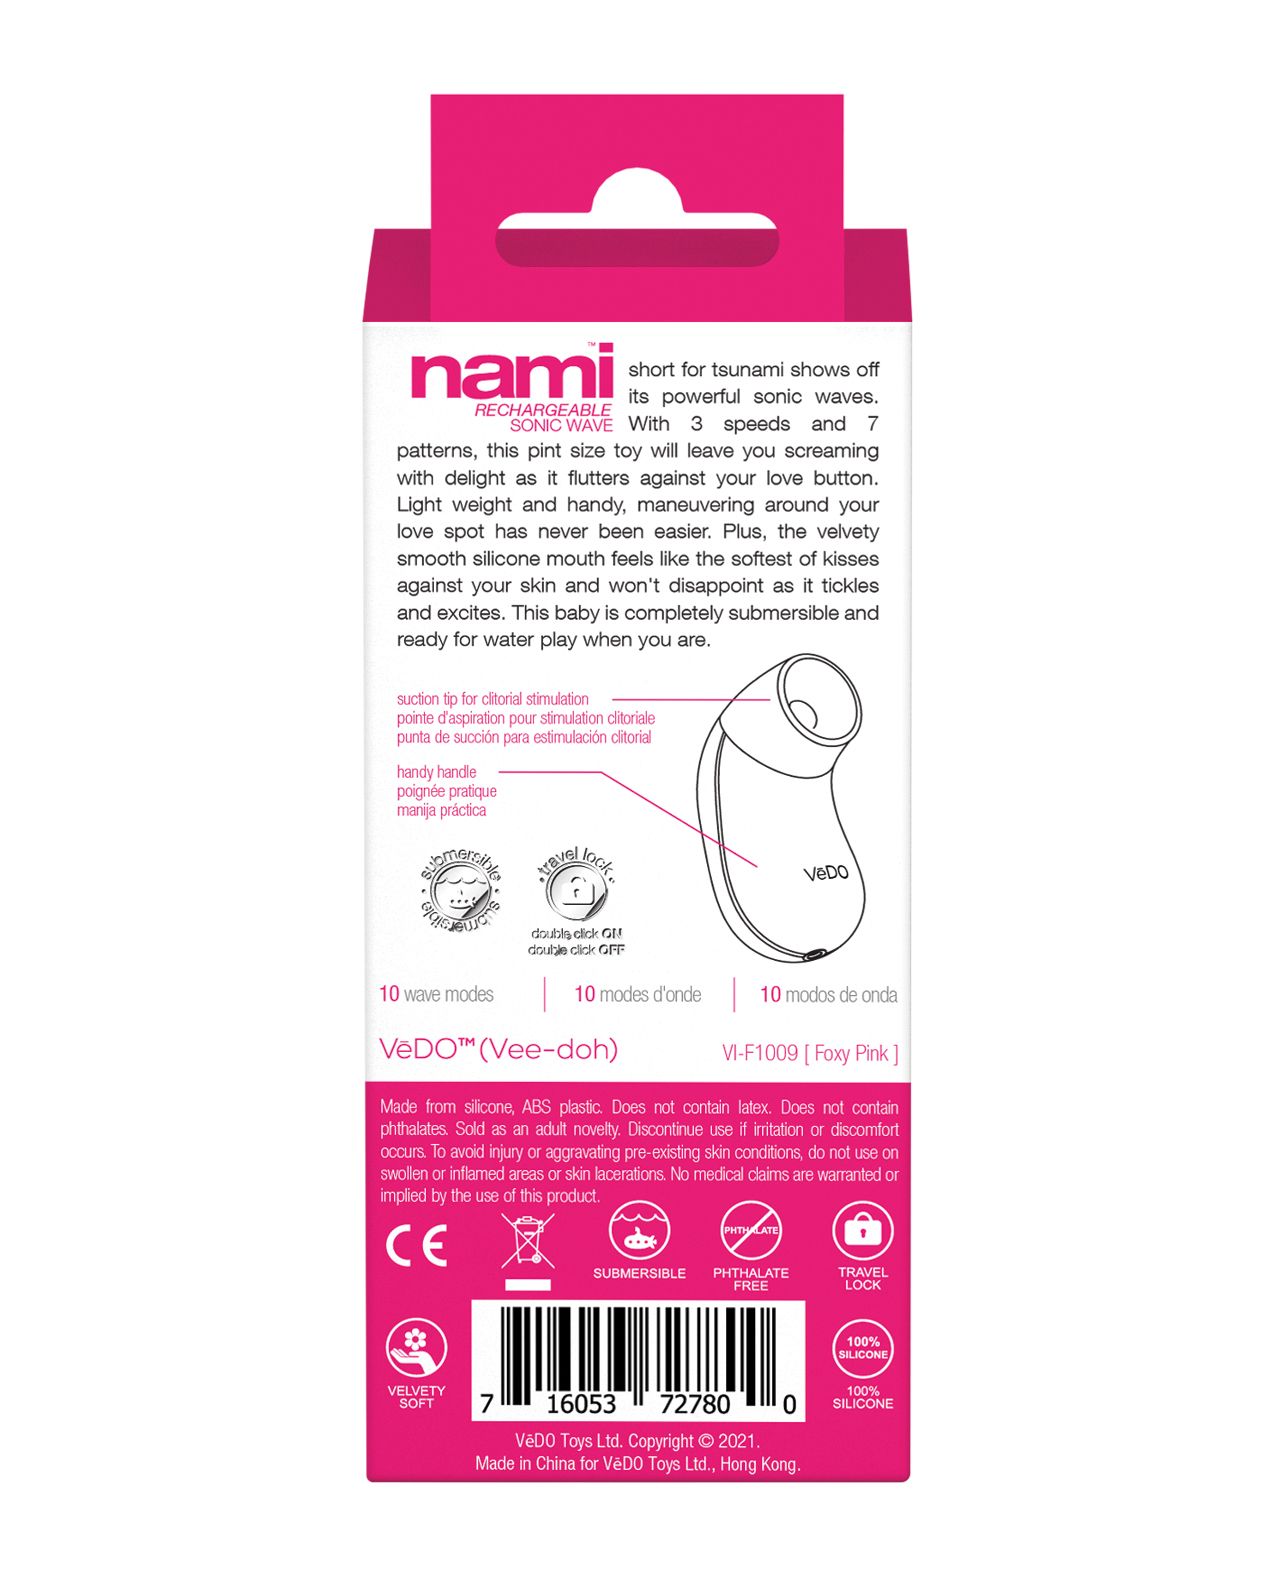 Back of the Nami box (pink).